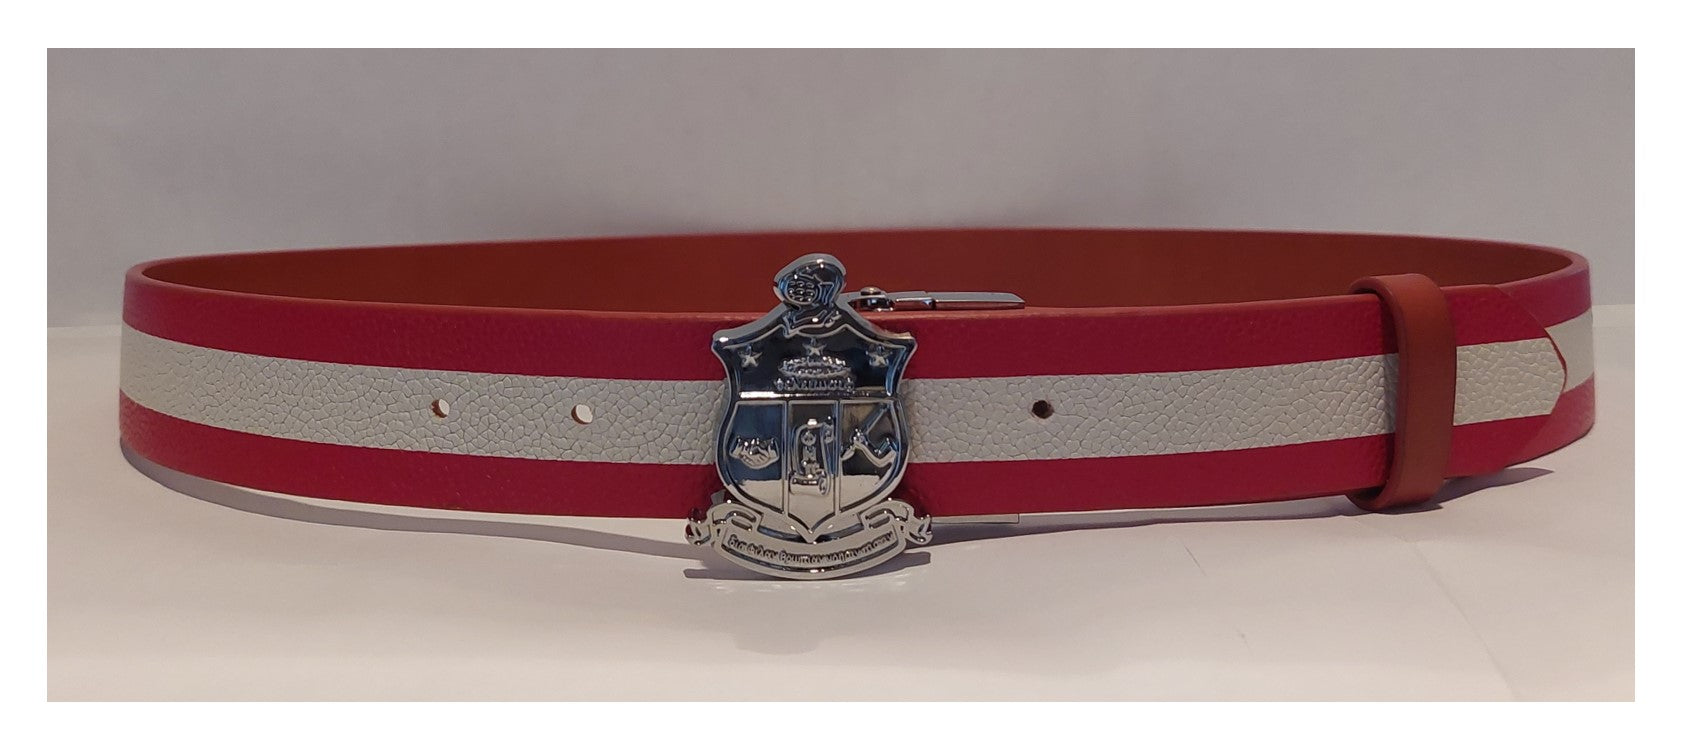 Kvalifikation Perversion Sovereign Kappa Alpha Psi Tan Belt and Silver Buckle Combination – The Kappa Kouture  by TB and S Enterprises